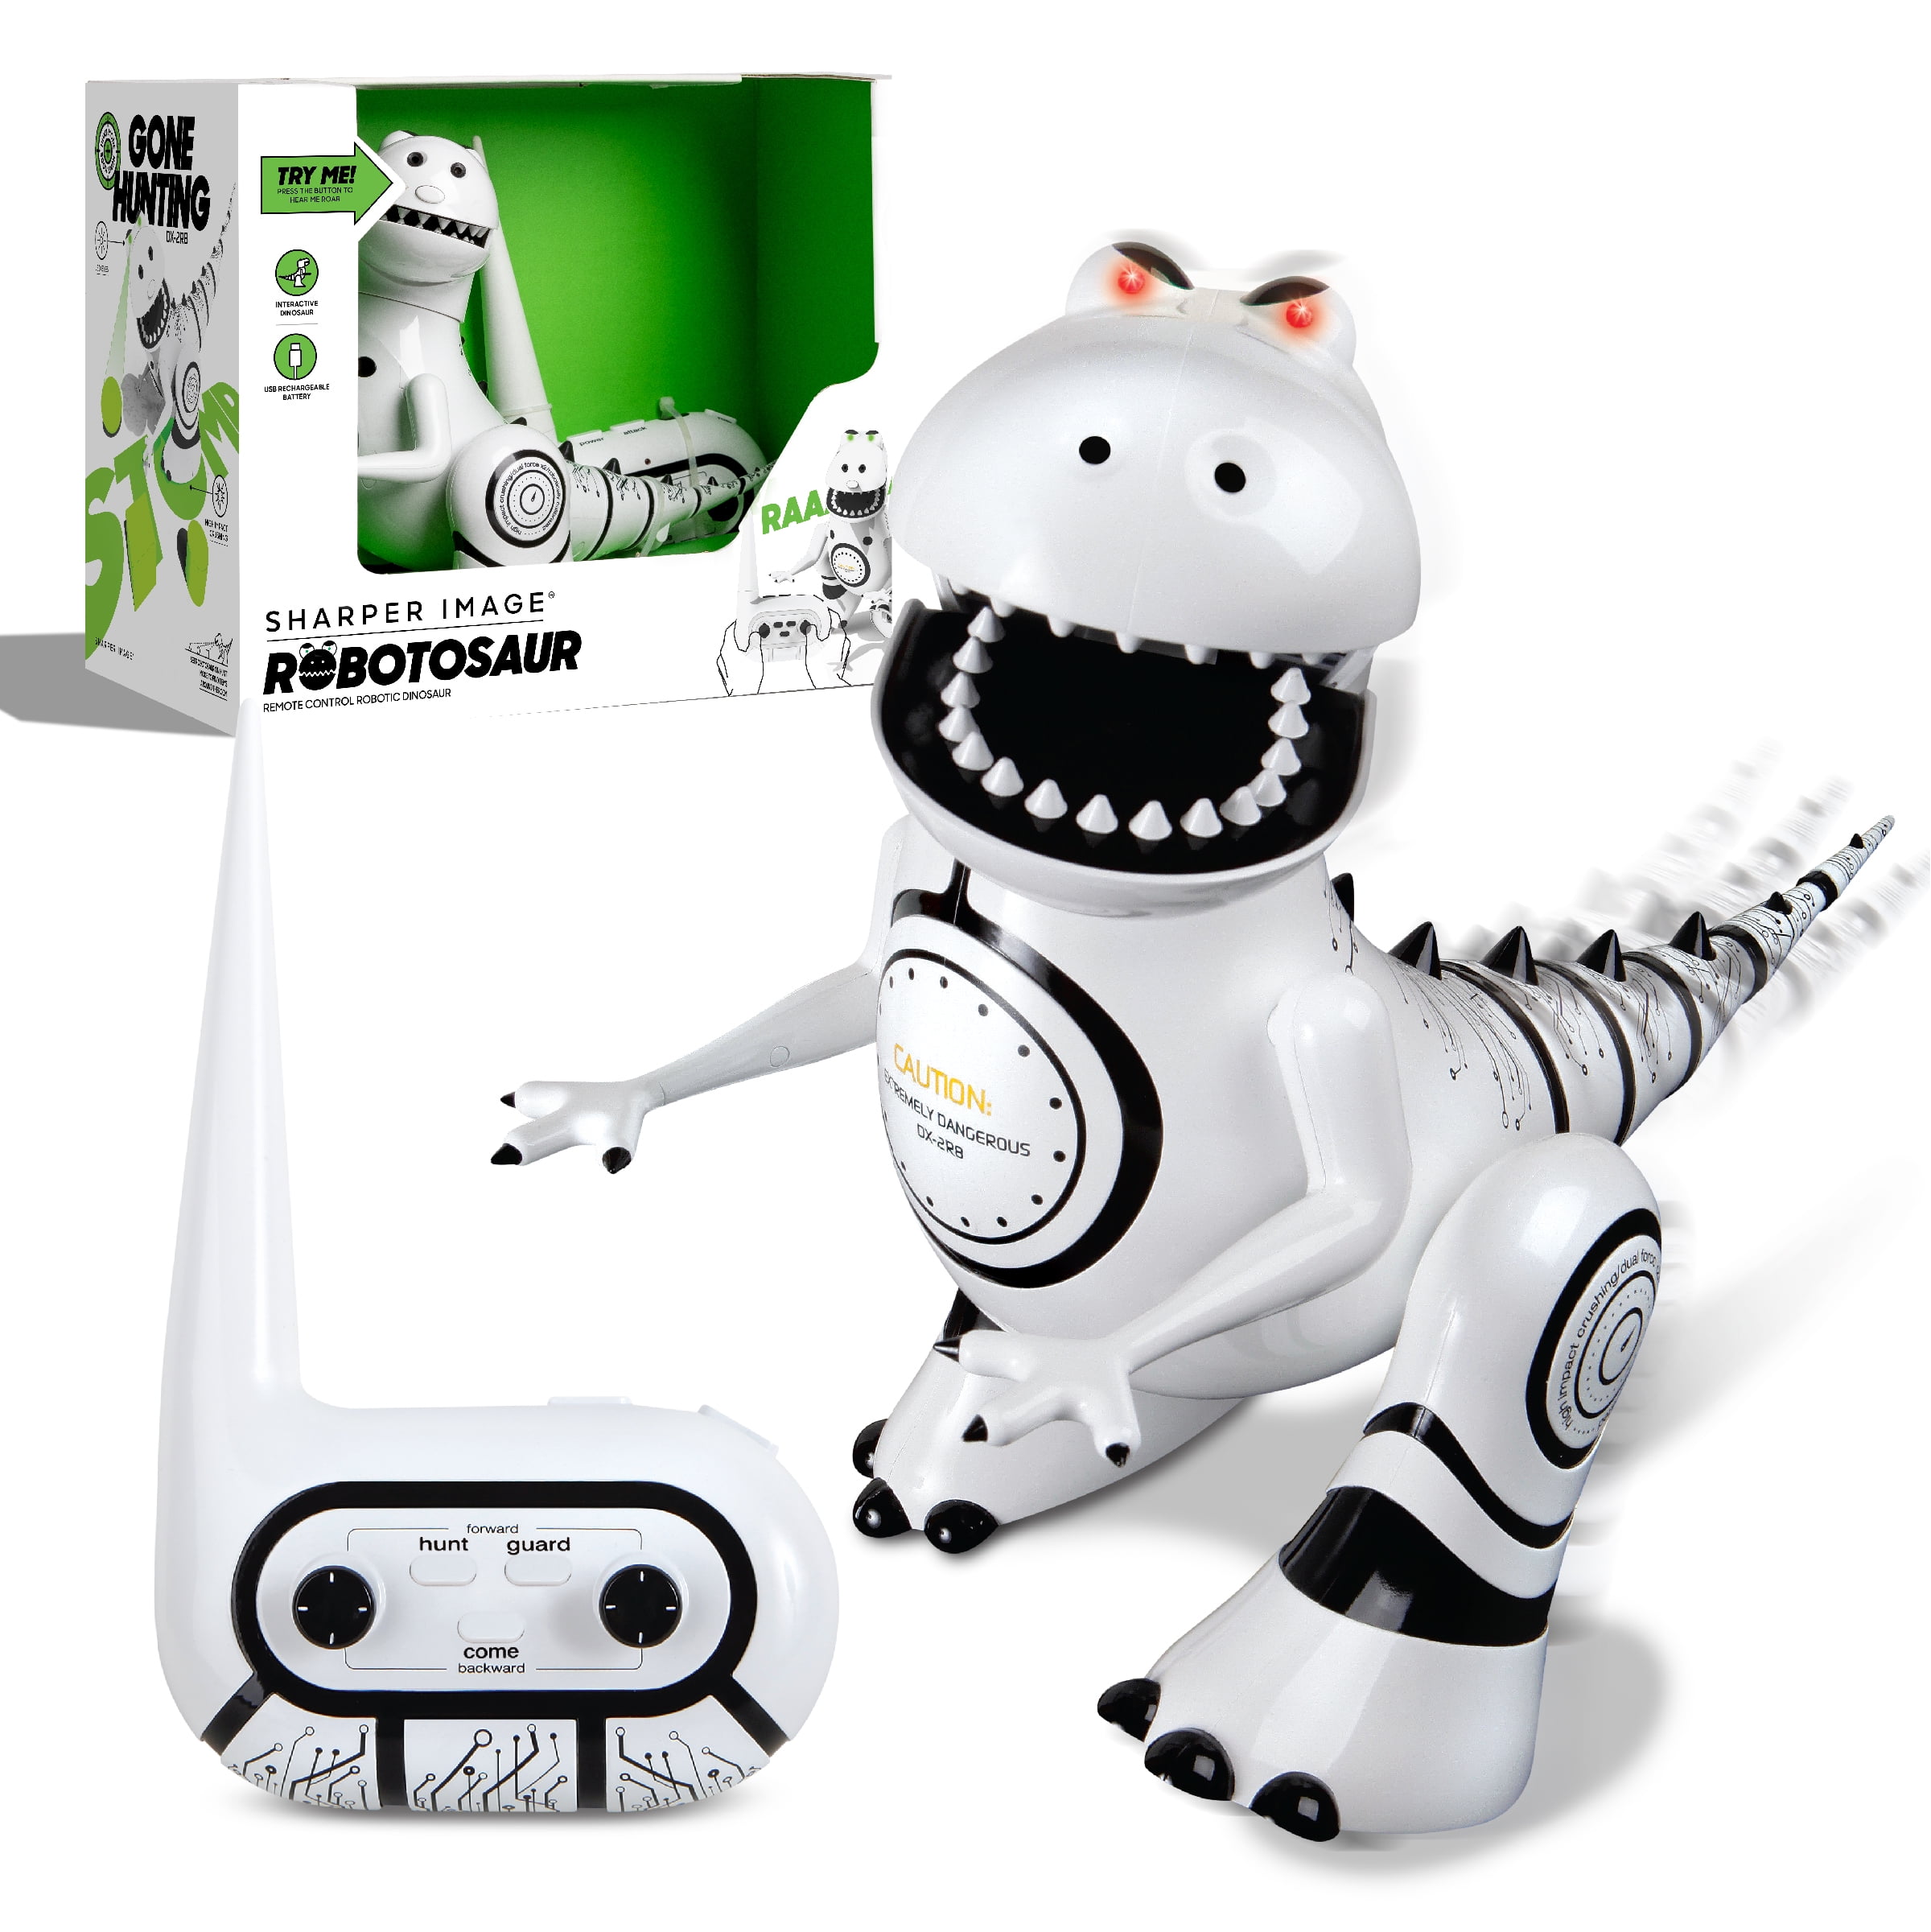 Sharper Interactive Robotosaur Robot Toy with Remote Control & Moving Parts, White - Walmart.com